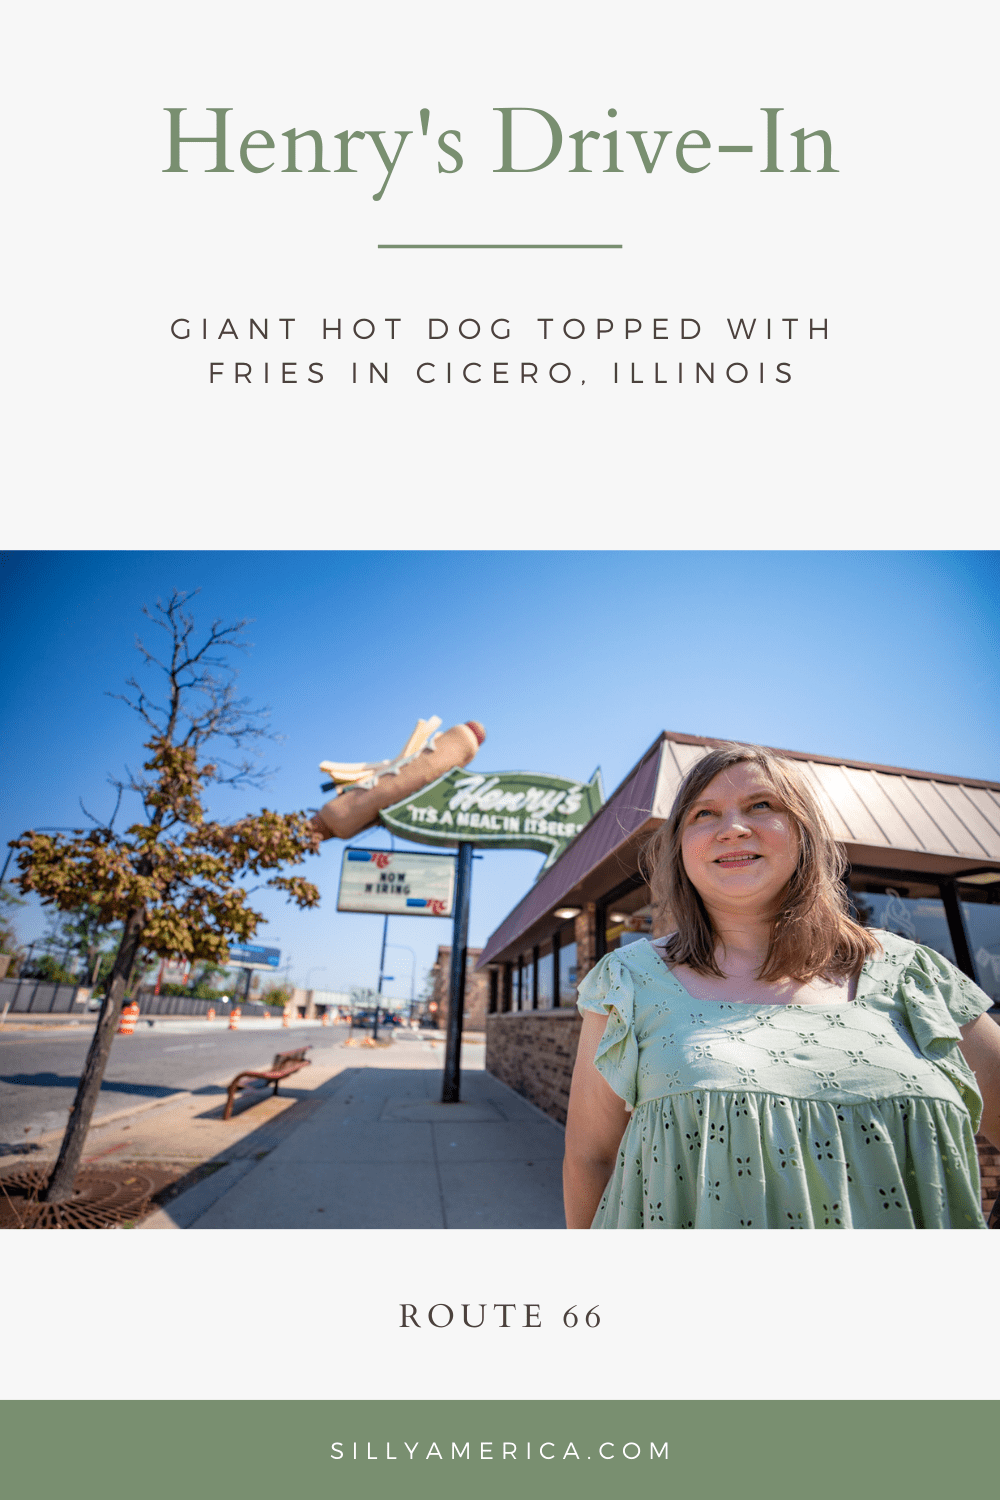 Henry's Drive-In is a Route 66 institution, having served fast-food fare to hungry travelers (and locals) since the 1950s. Stop in on a Route 66 road trip for a hit dog wrapped with fries and check out the giant hot dog and fries on the roof.  #Route66 #Route66RoadTrip #IllinoisRoute66 #Illinois #IllinoisRoadTrip #IllinoisRoadsideAttractions #RoadsideAttractions #RoadsideAttraction #RoadsideAmerica #RoadTrip